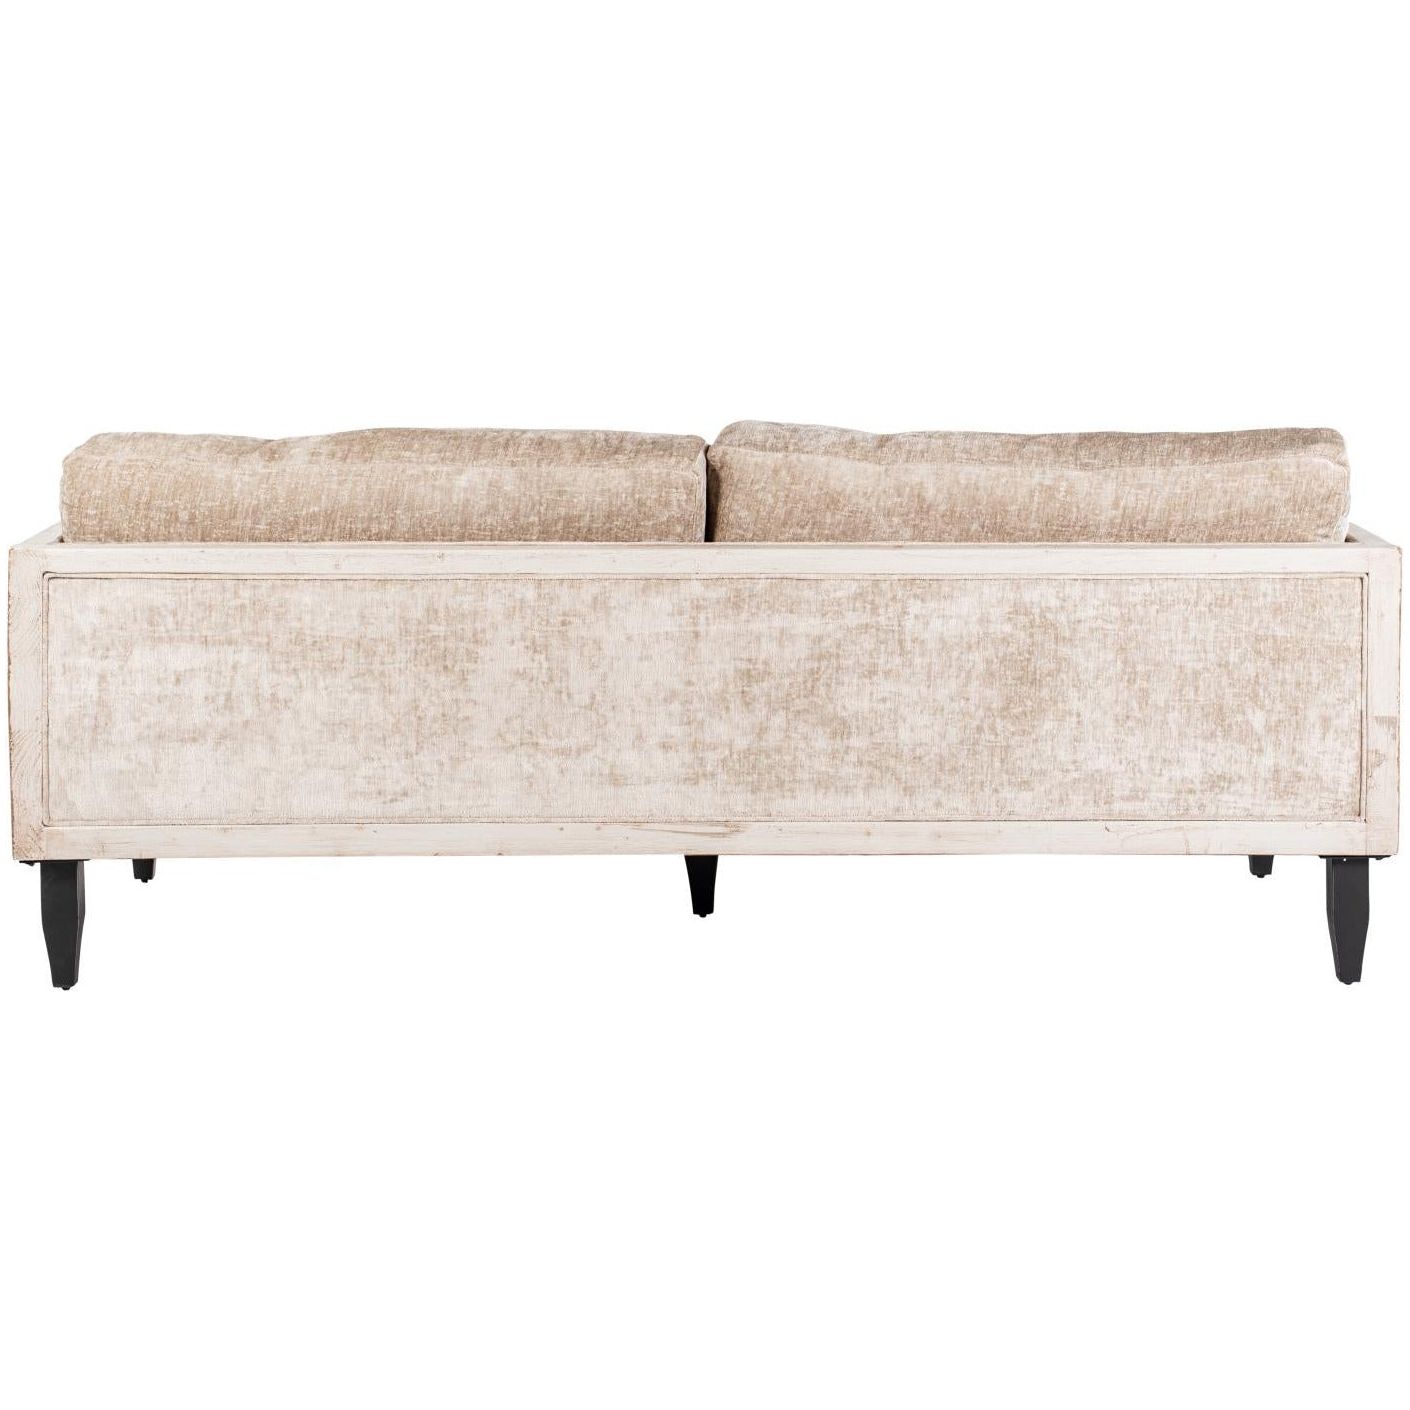 A vintage-style Burton Champagne Chenille Sofa with two plush back cushions and a reclaimed pine frame, standing on short black cylindrical legs, isolated on a white background.